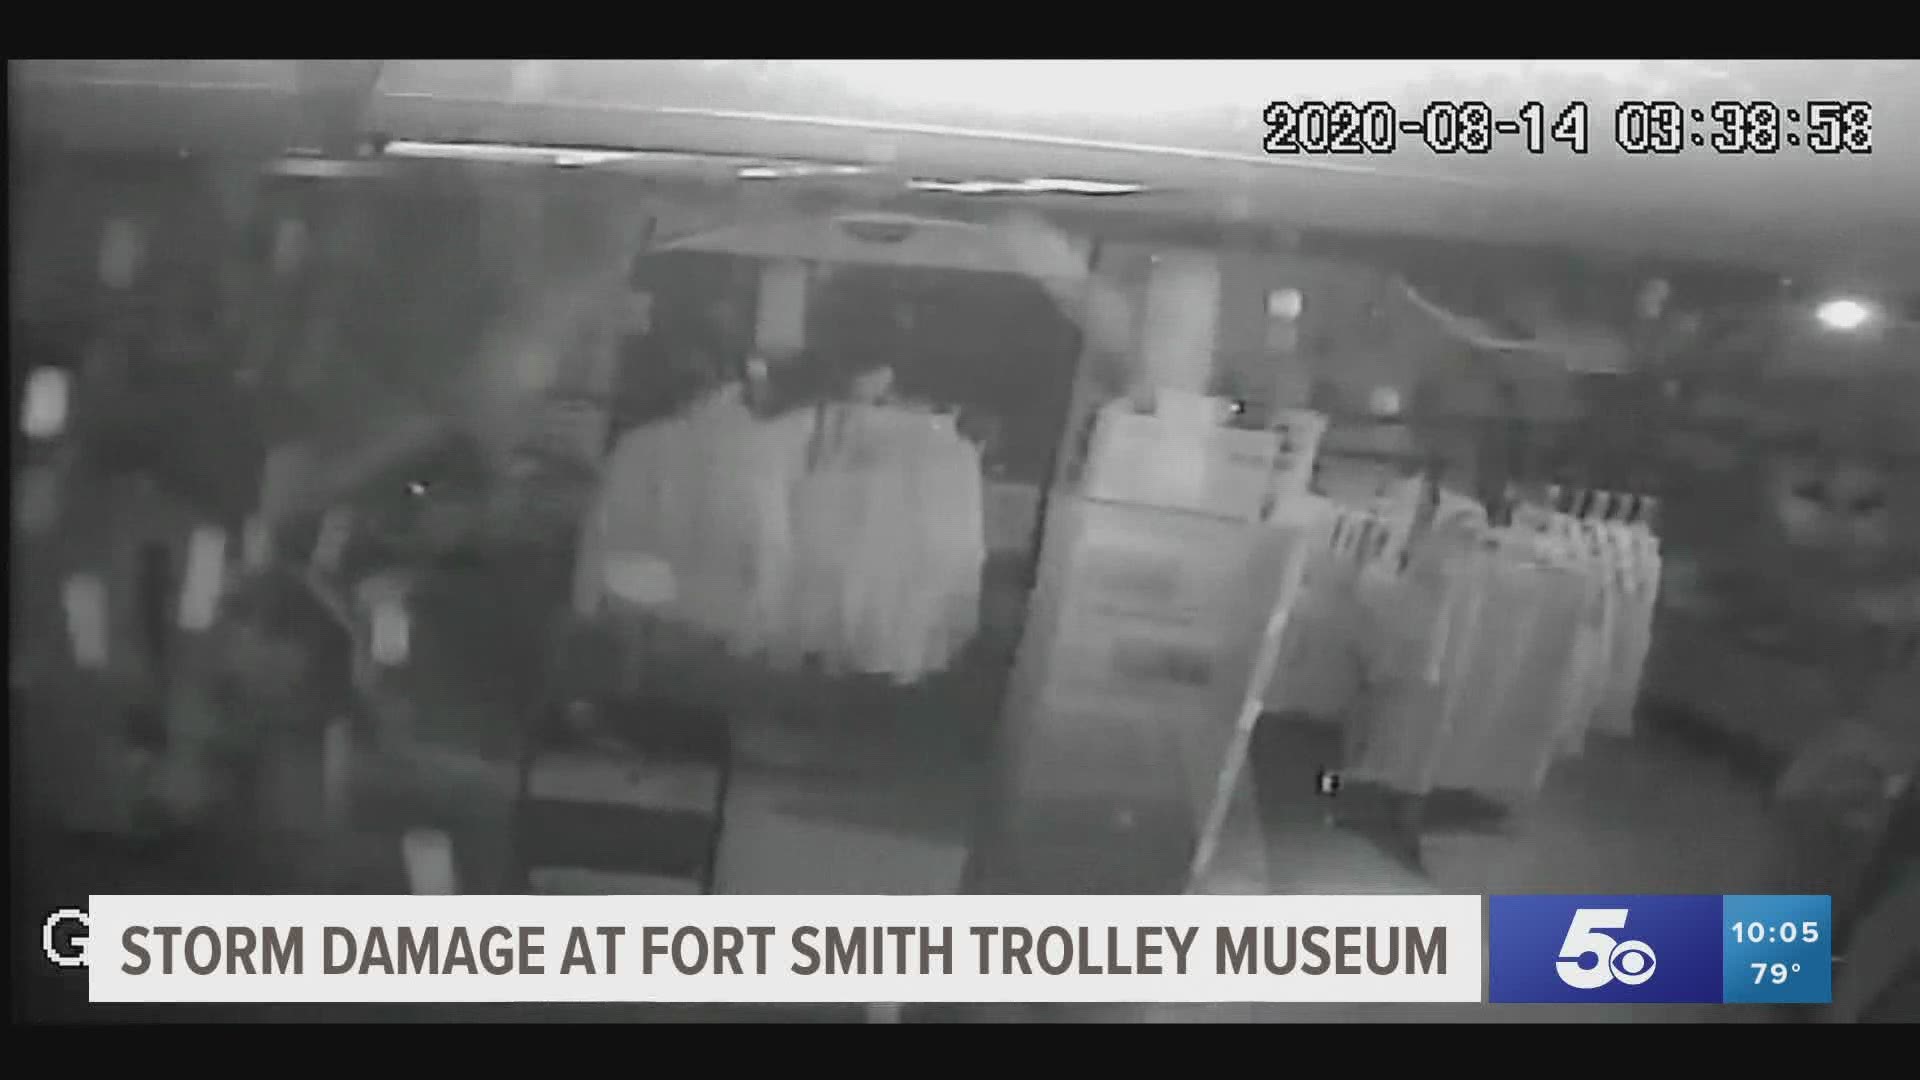 Storm damage at Fort Smith Trolley Museum.